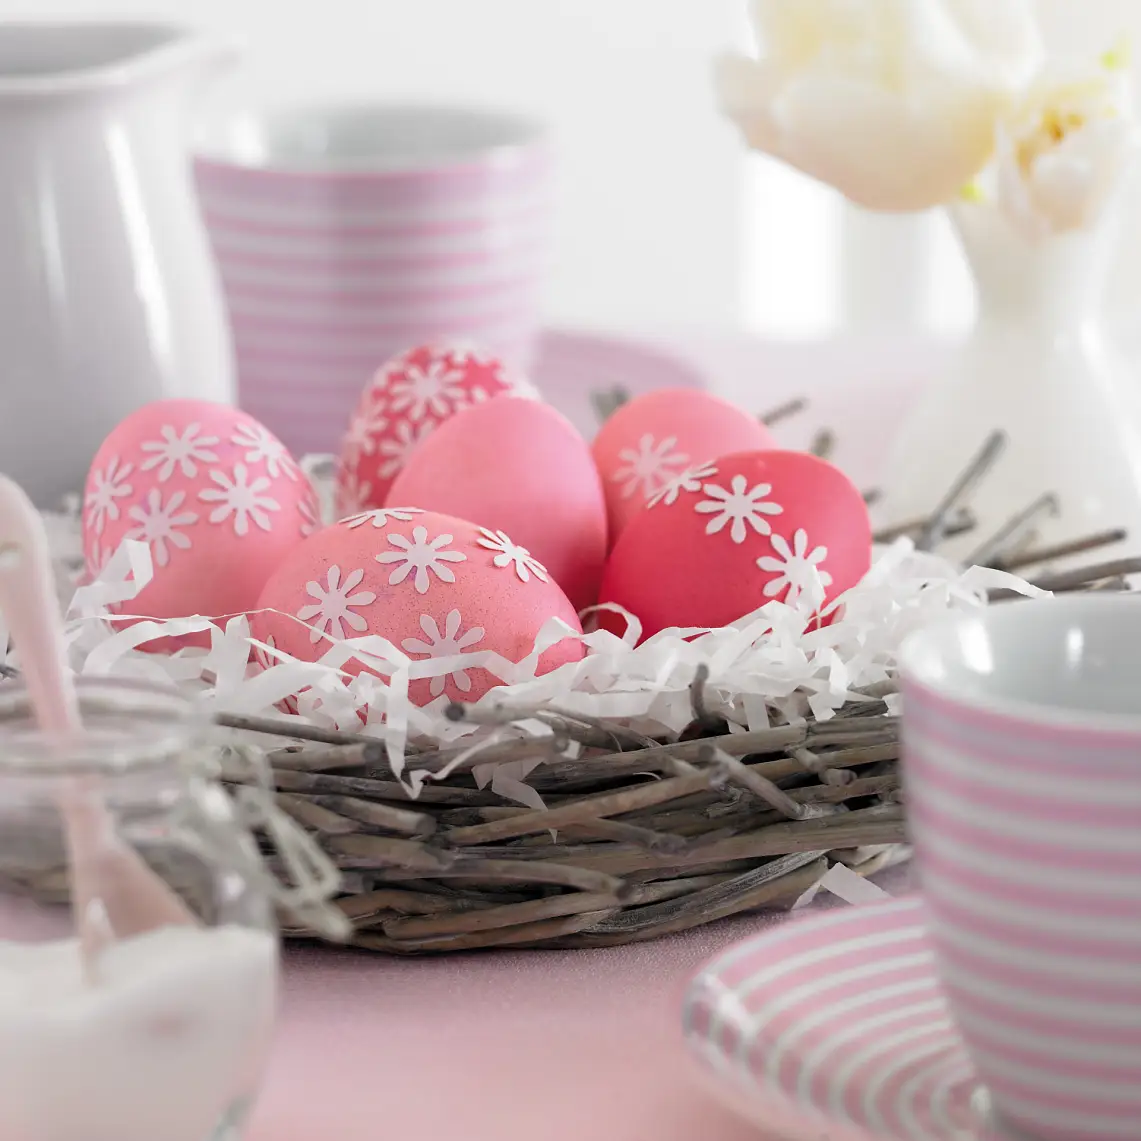 Isn't that lovely: Decorate your Easter eggs with punch-out paper flowers - they're easy to attach.